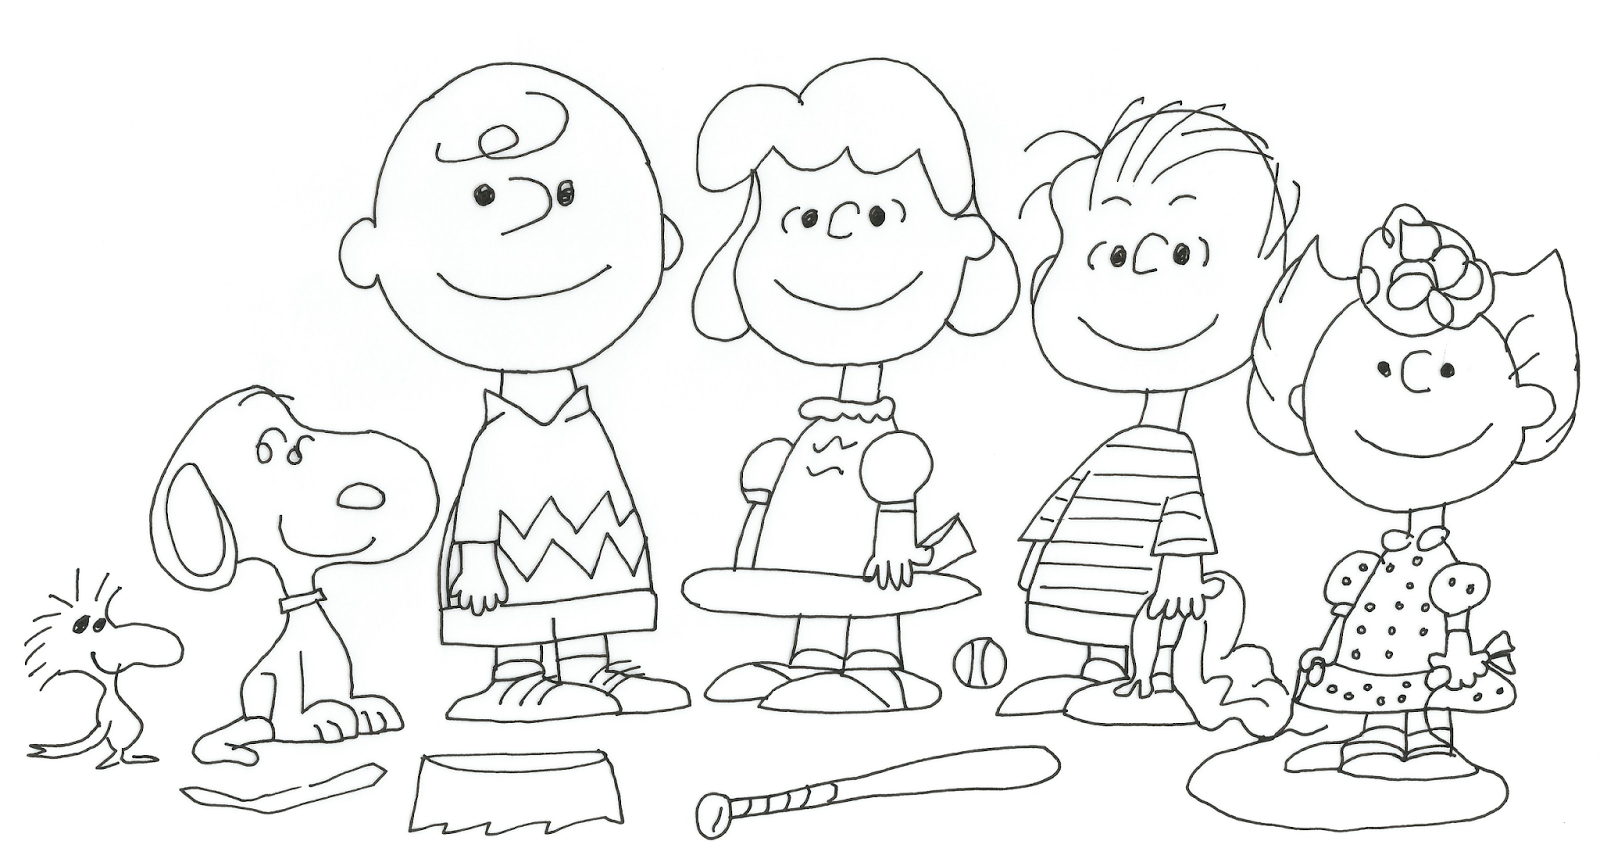 Snoopy And Woodstock Coloring Pages Free Charlie Brown Snoopy And Peanuts Coloring Pages Baseball Game